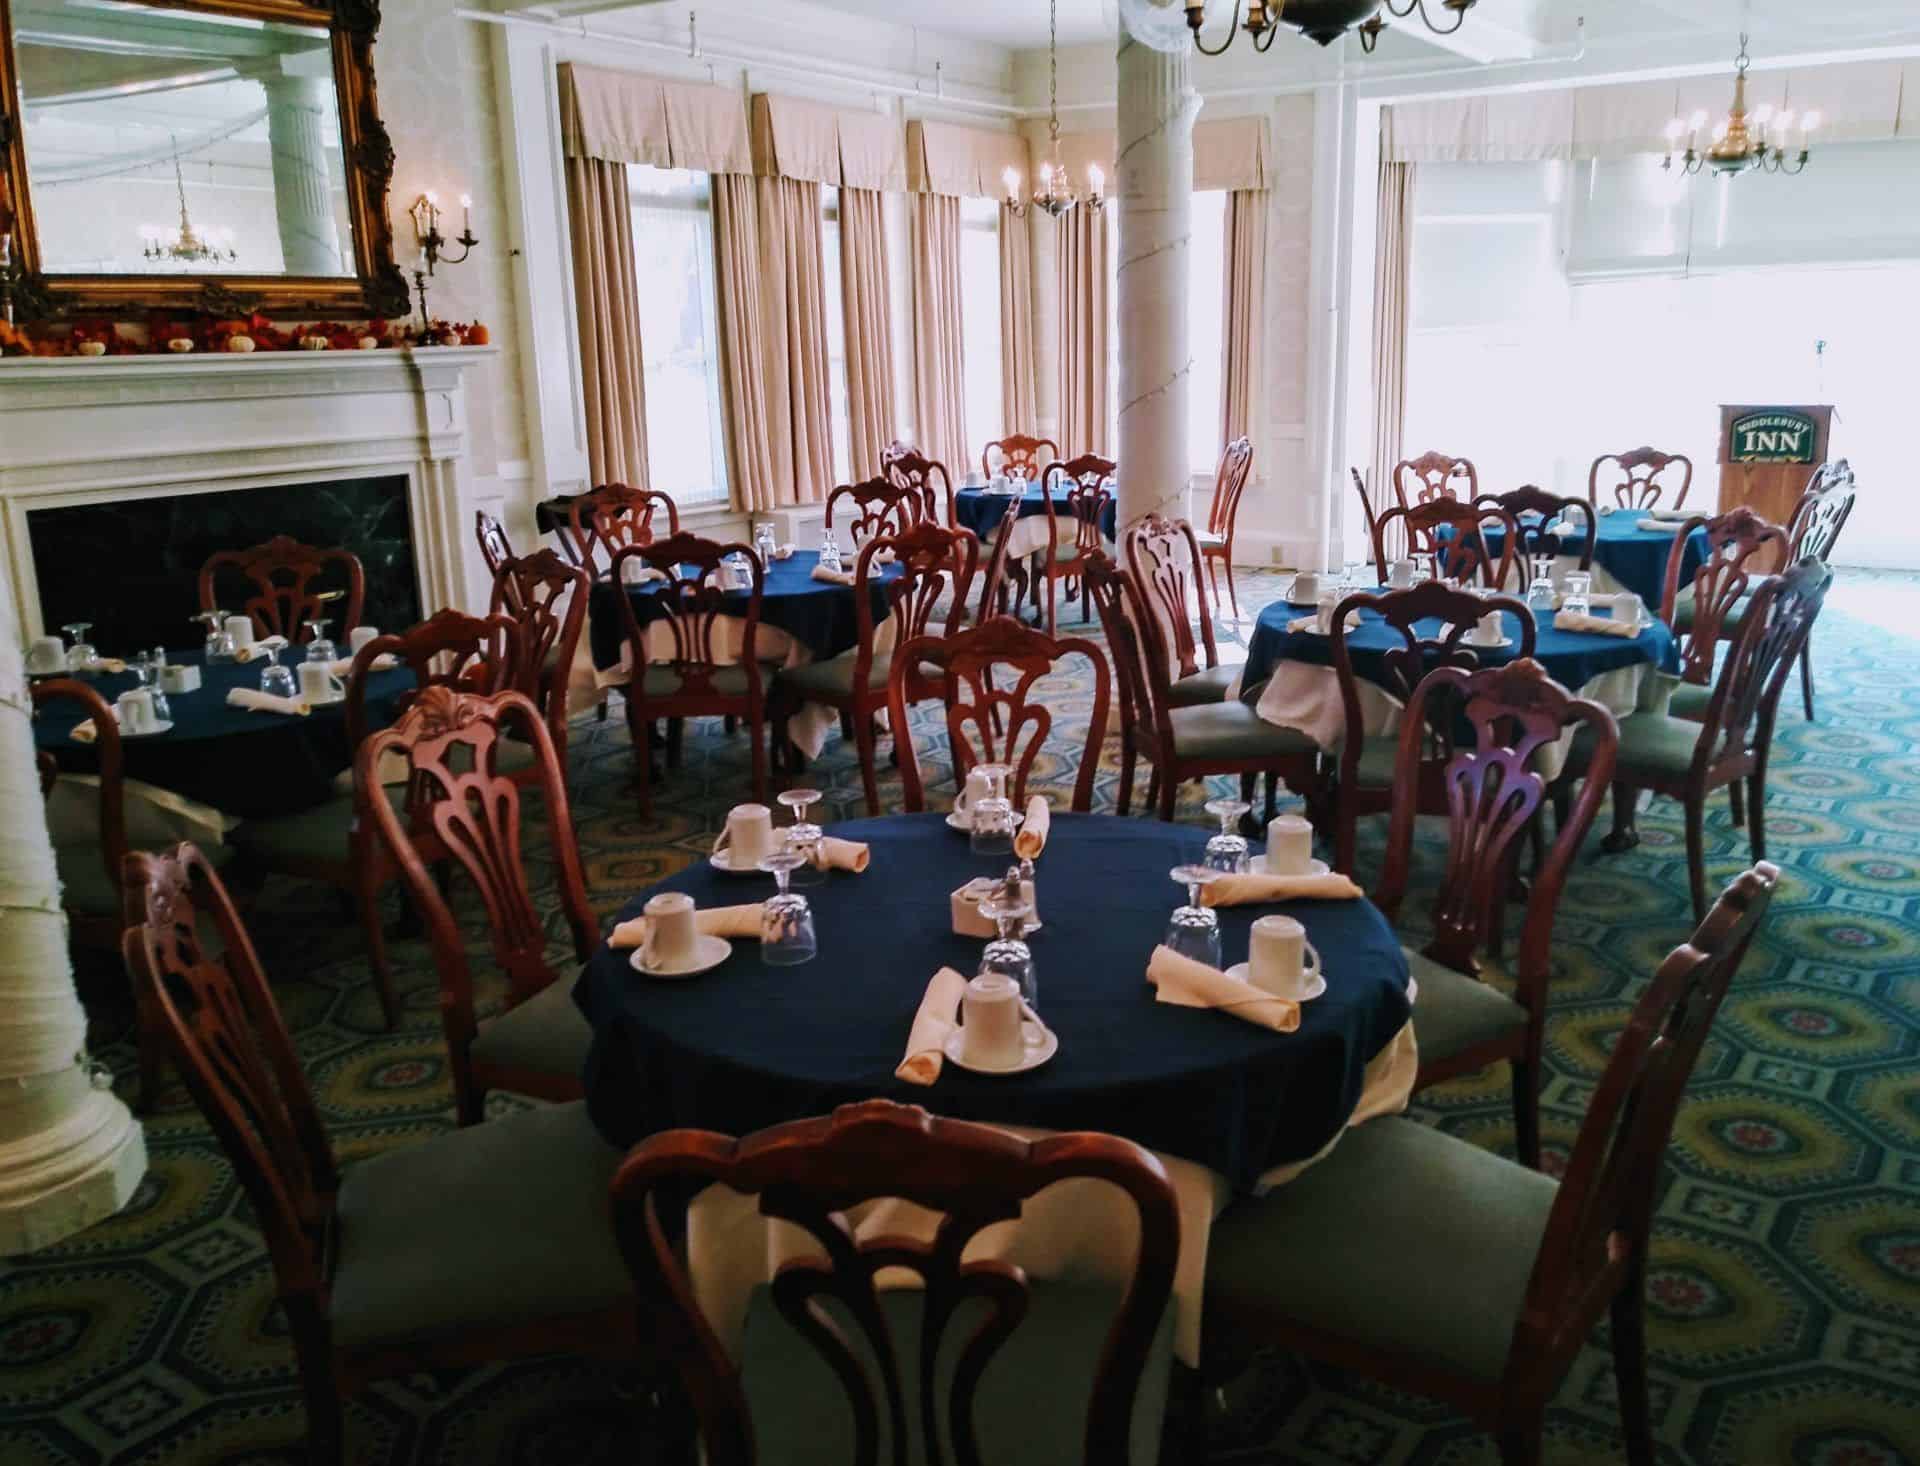 Middlebury Inn - Banquet Room with Podium